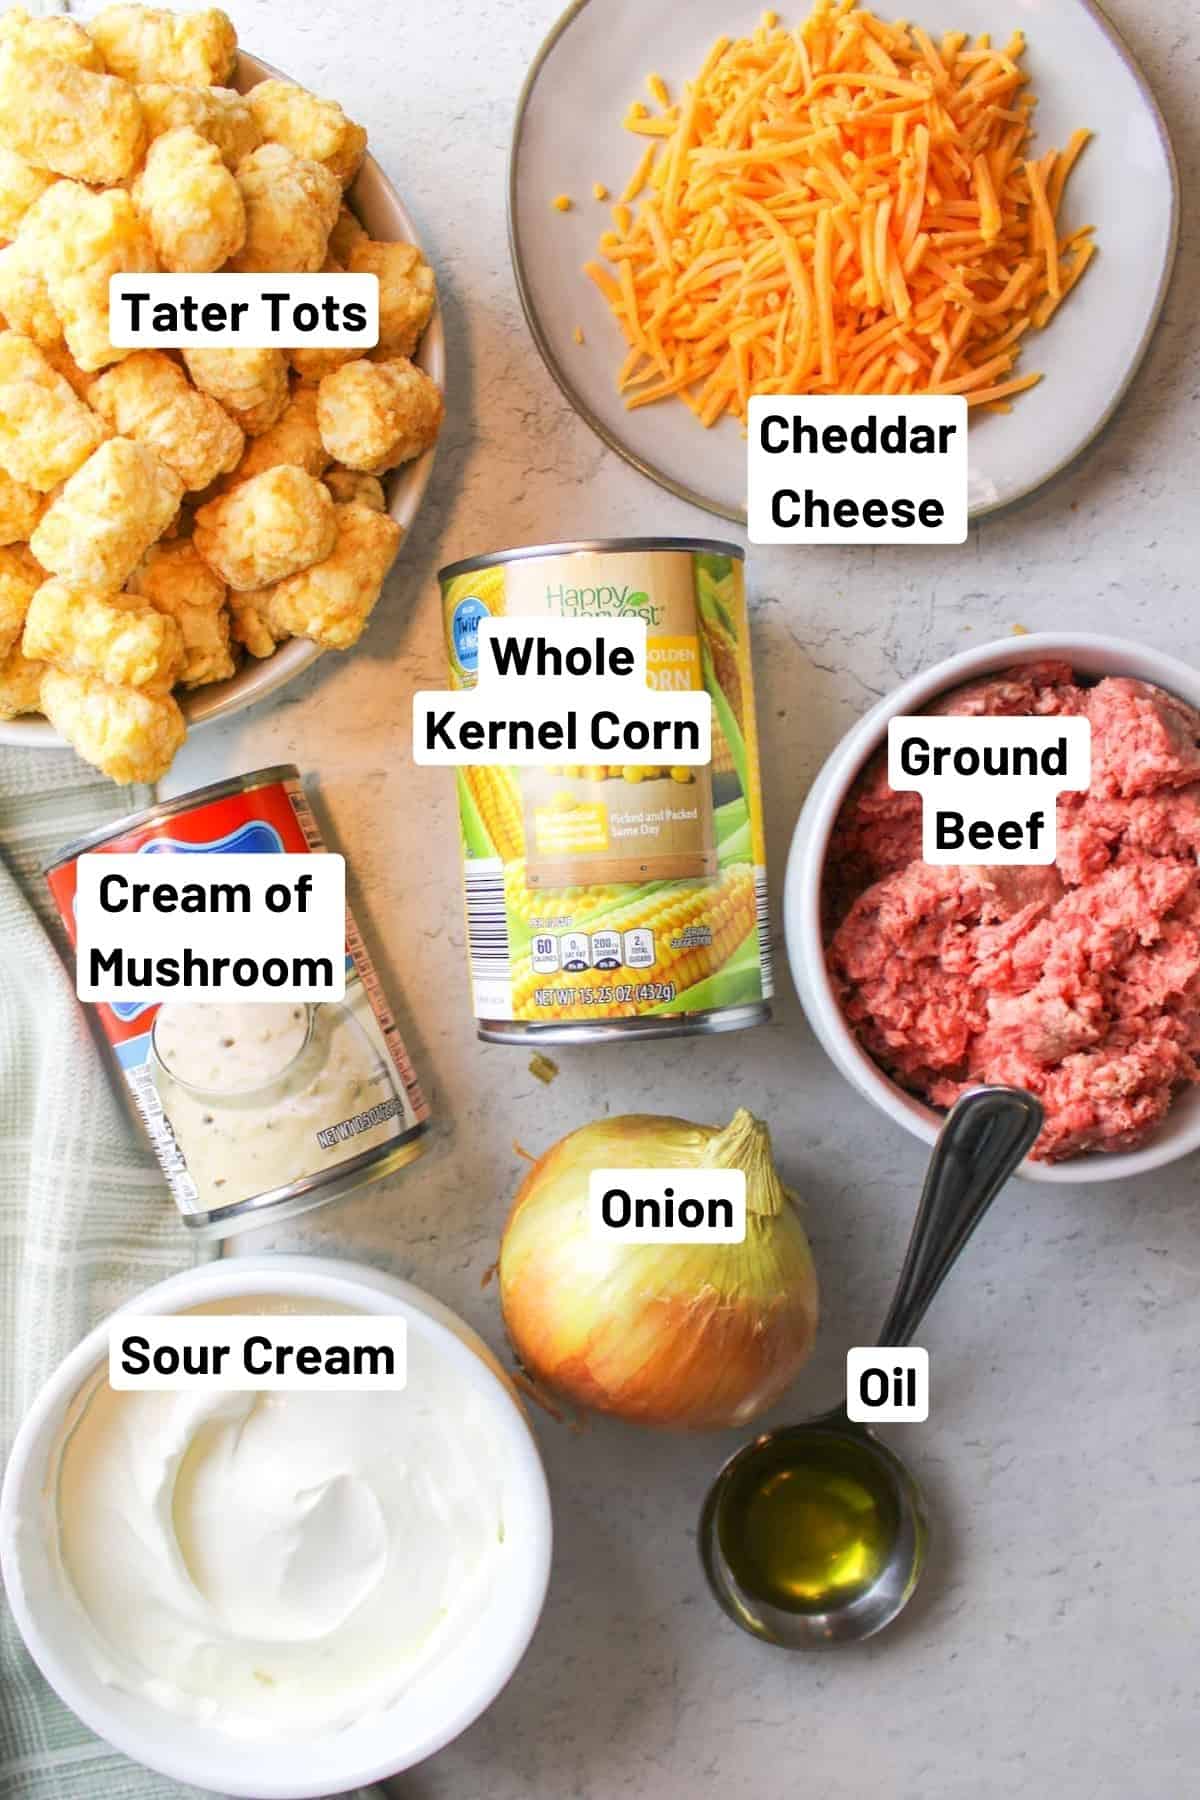 the ingredients needed to make tater tot casserole hotdish.